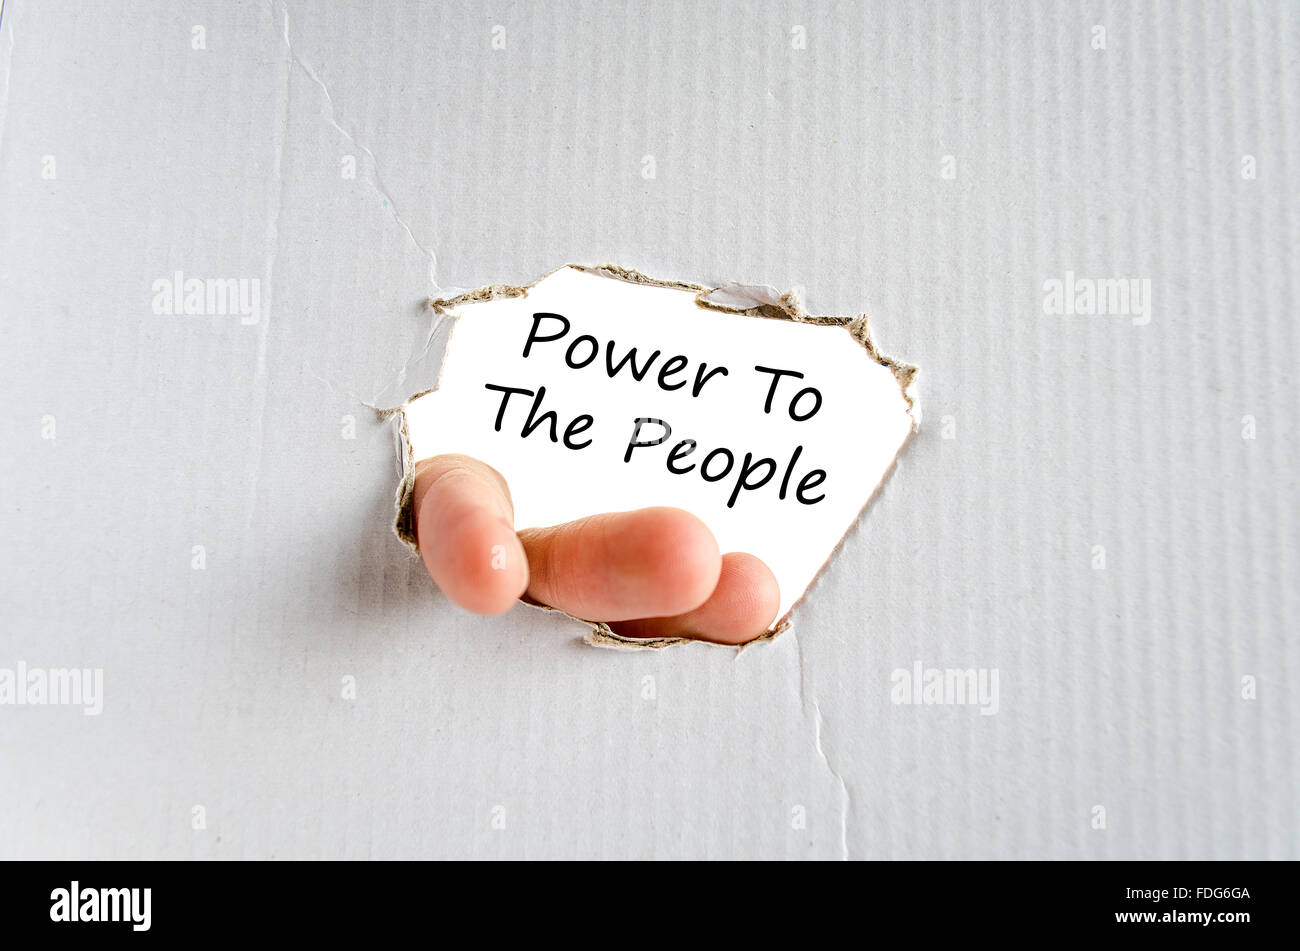 Power to the people text concept isolated over white background Stock Photo